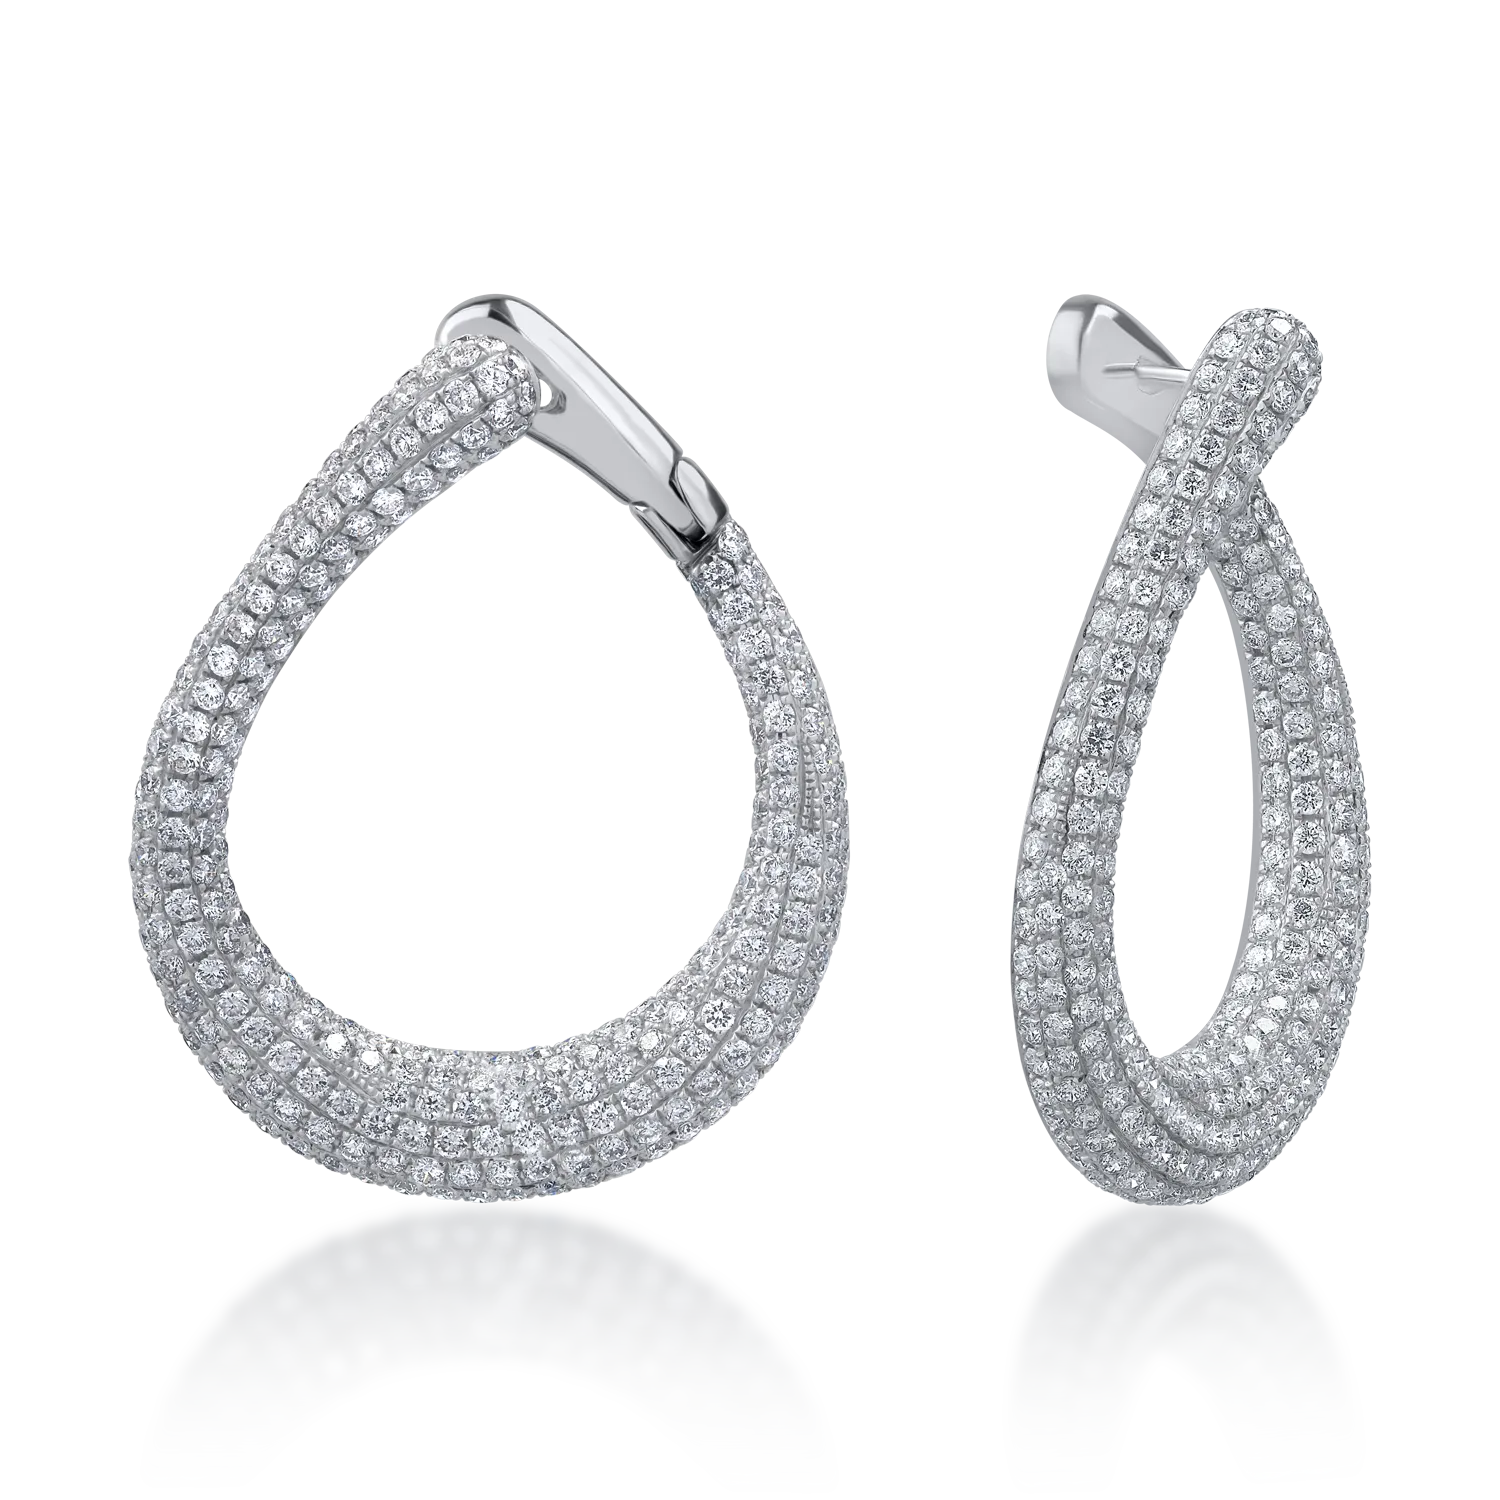 18K white gold earrings with 3.58ct diamonds